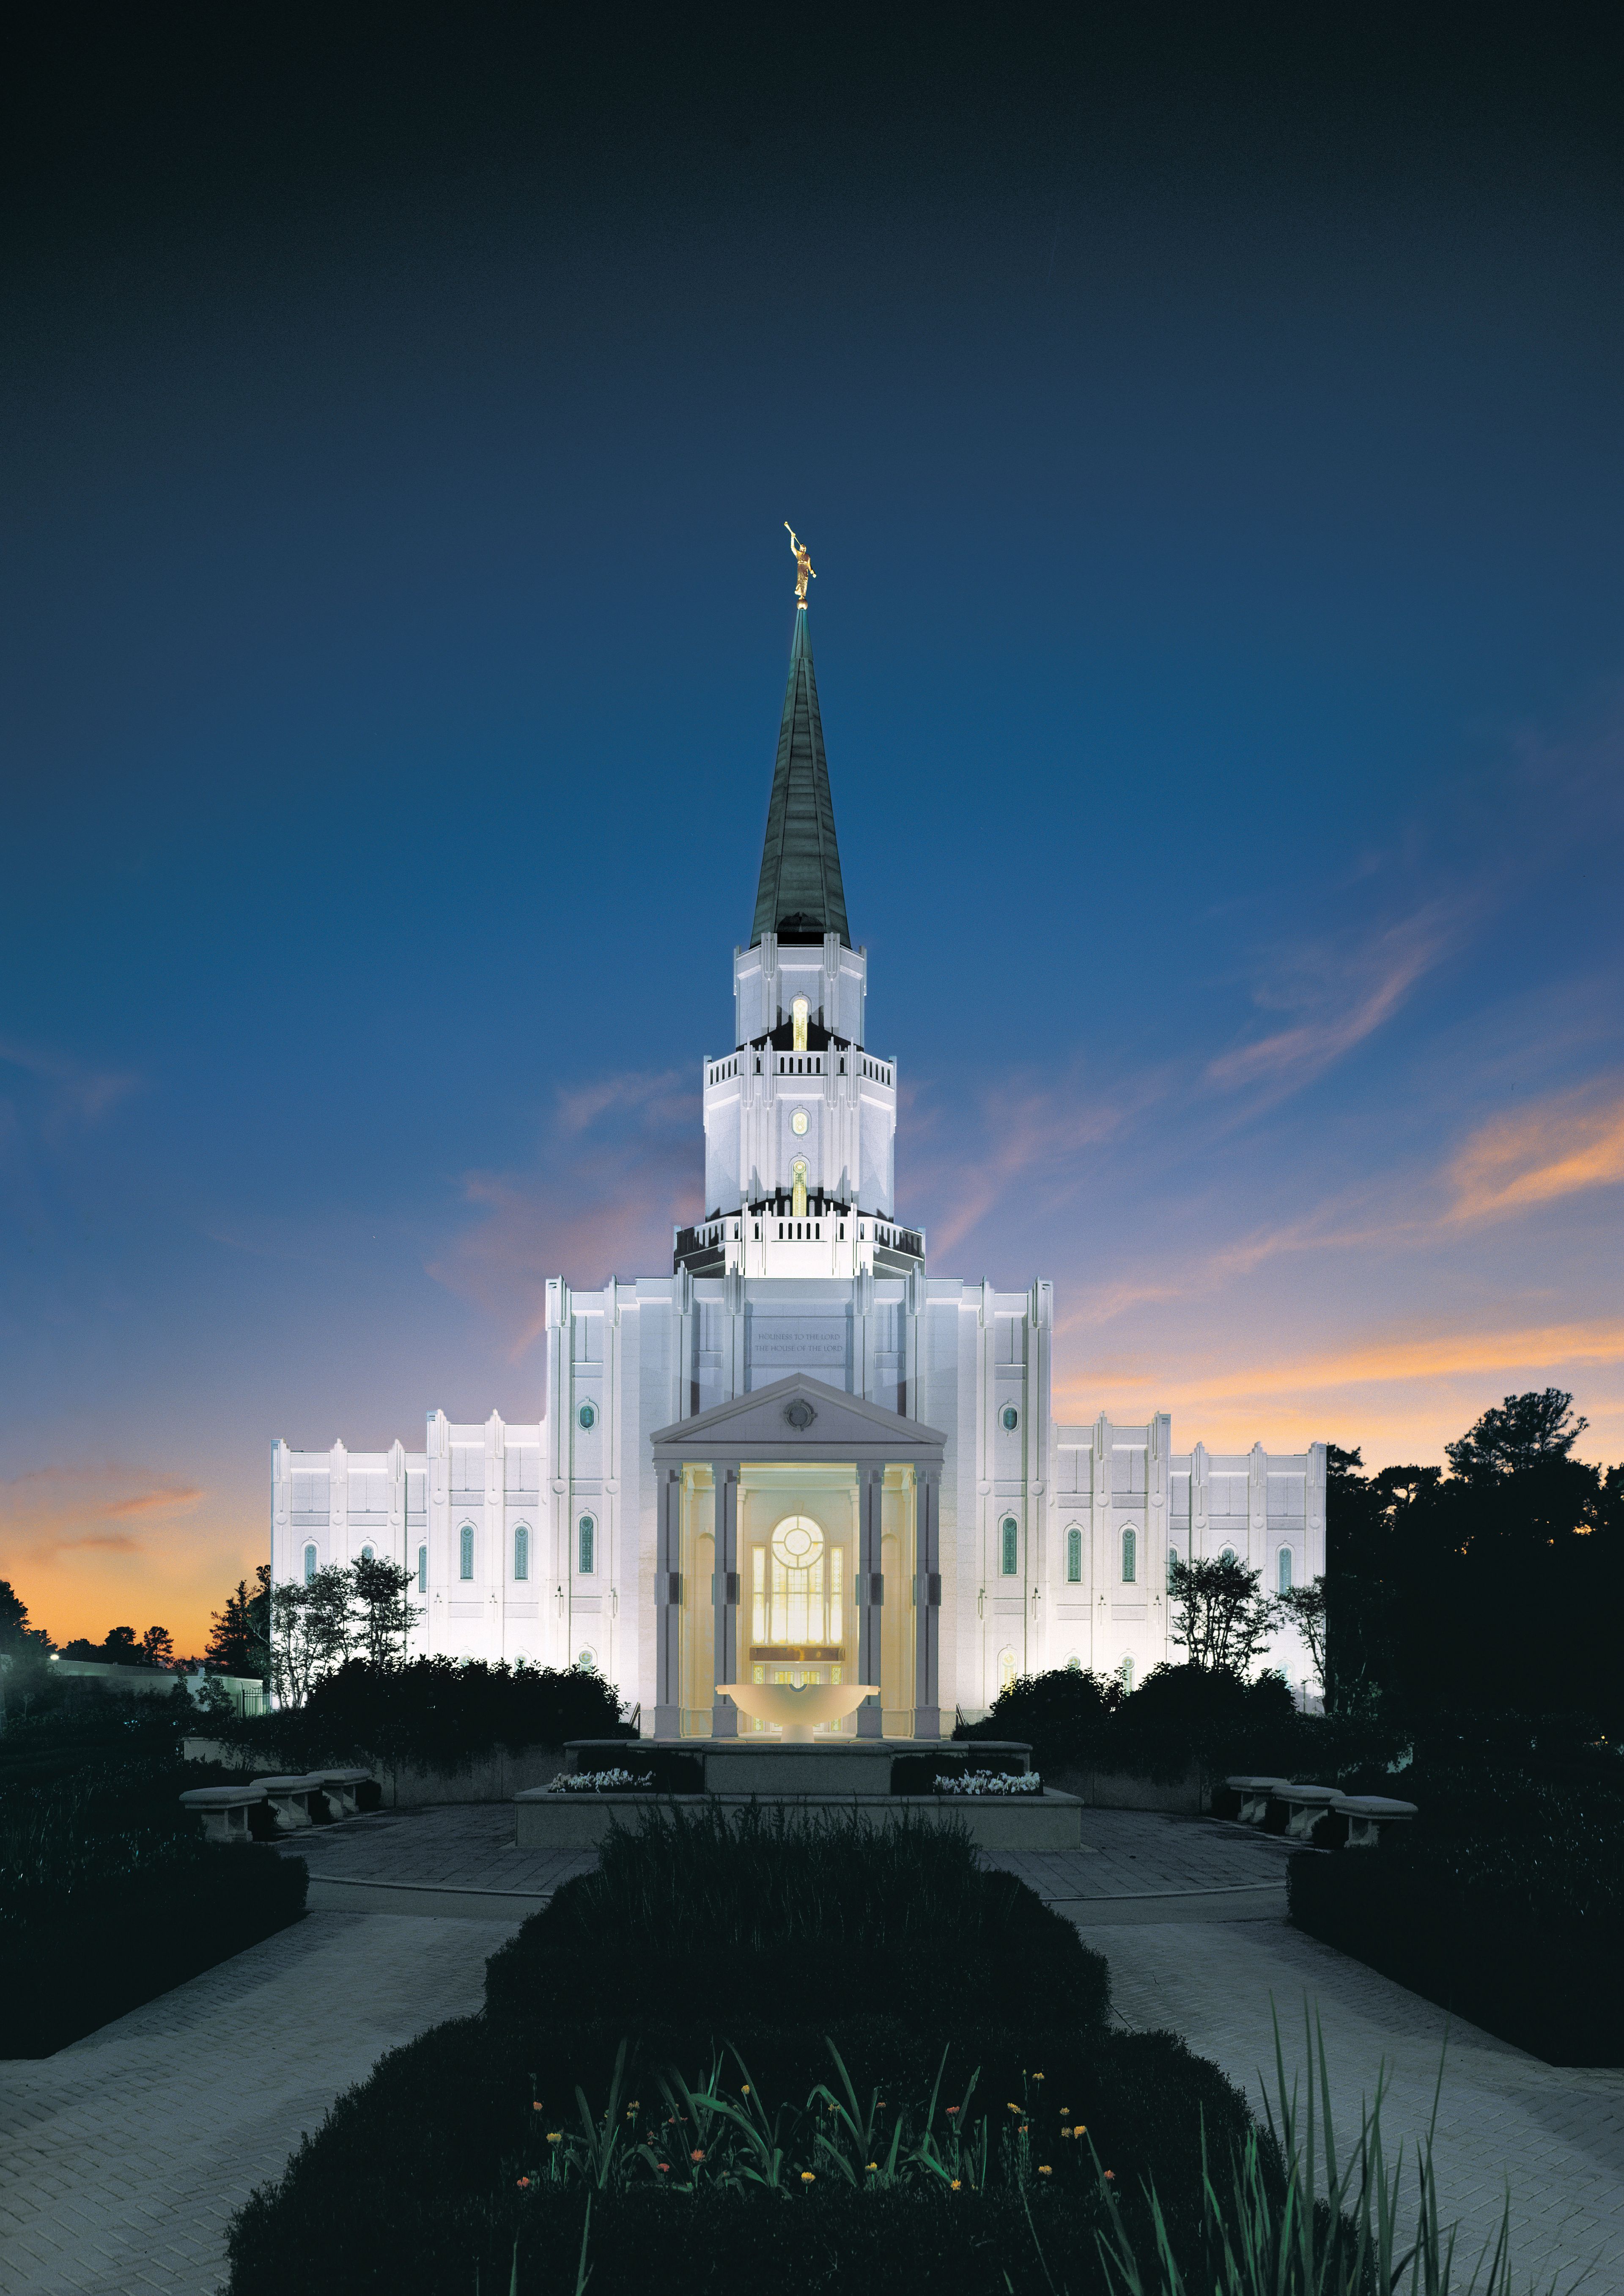 An exterior view of the Houston Texas Temple lit up at night.